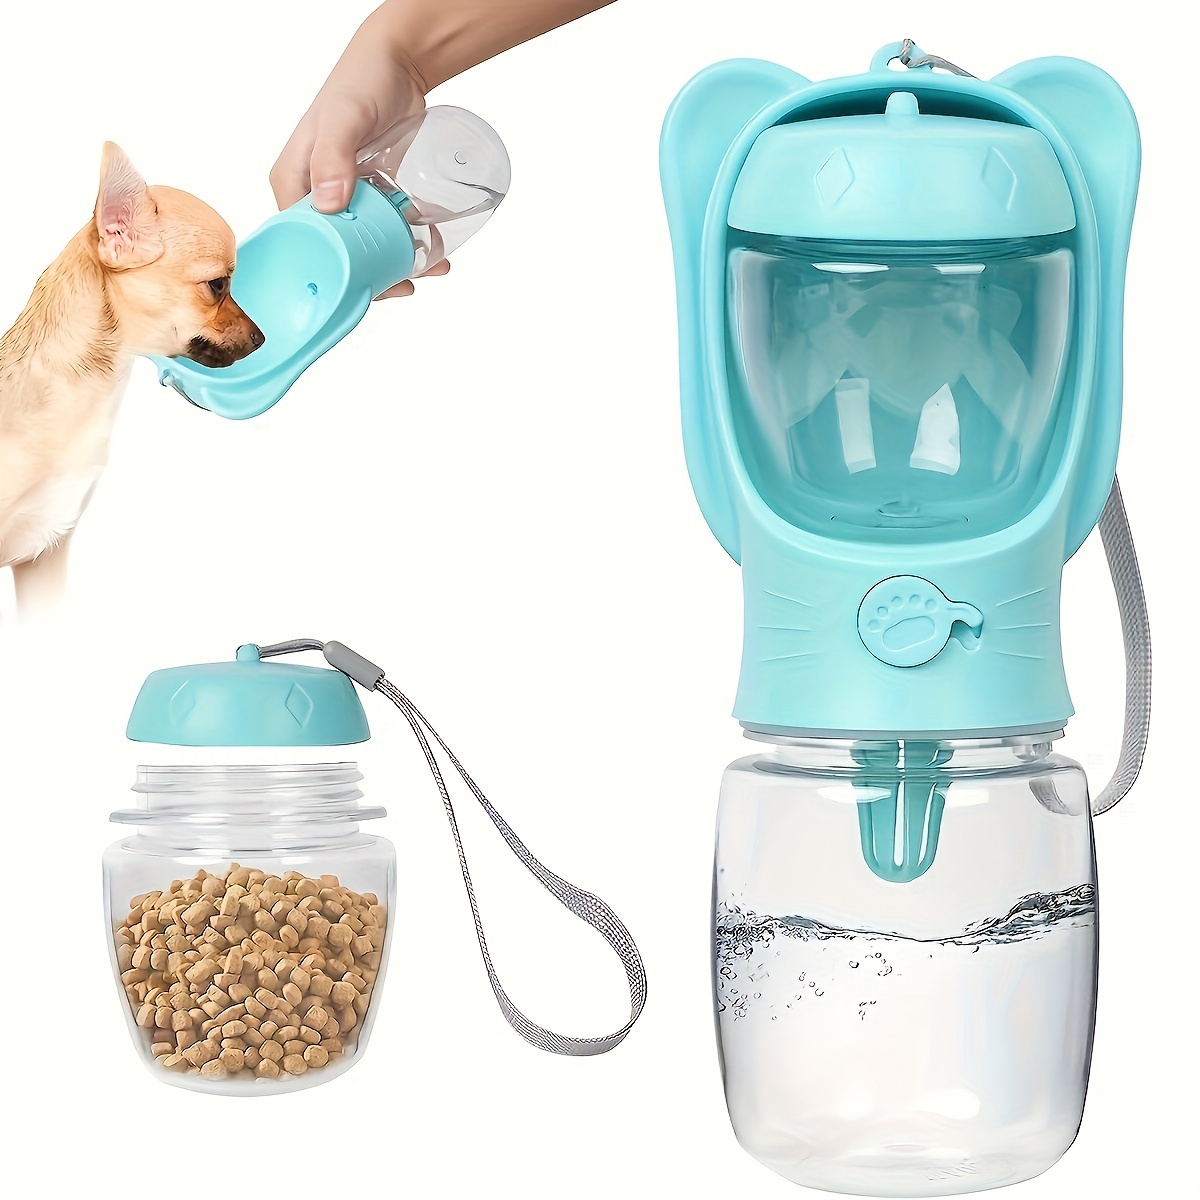 

2-in-1 Portable Dog Water & Food Bottle - Dual-purpose Design For Outdoor Adventures, Leak-proof Sipping System With Removable Food Container For Convenient Feeding On The Go